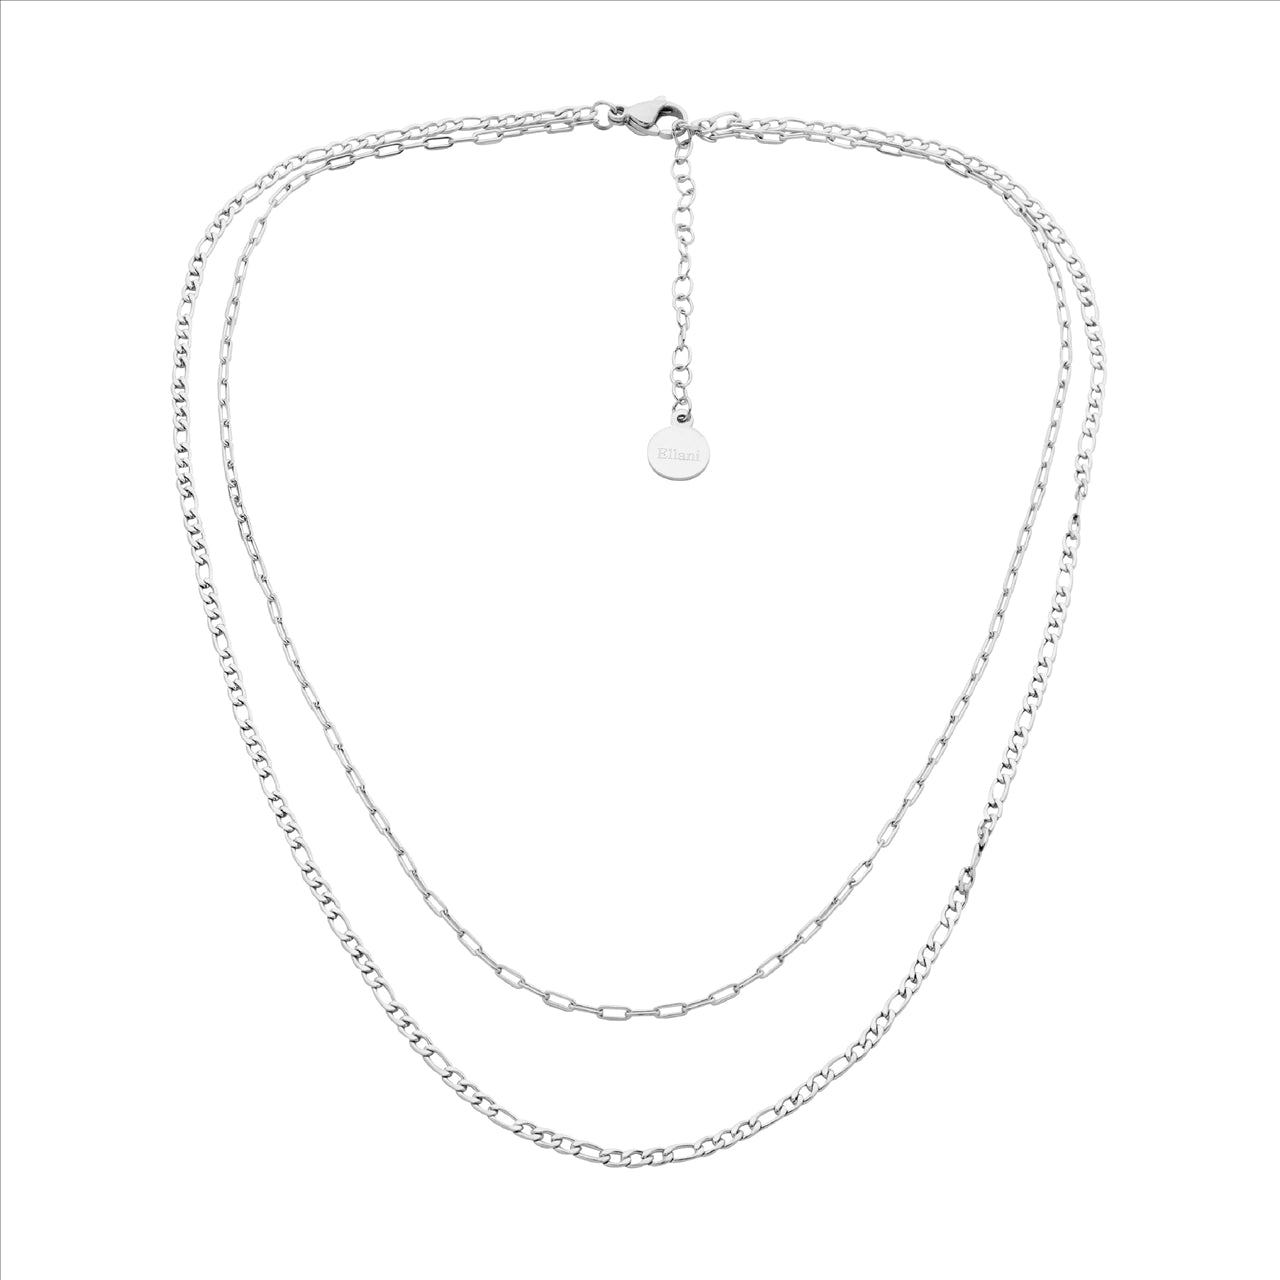 Ellani Stainless Steel Double Chain Necklace